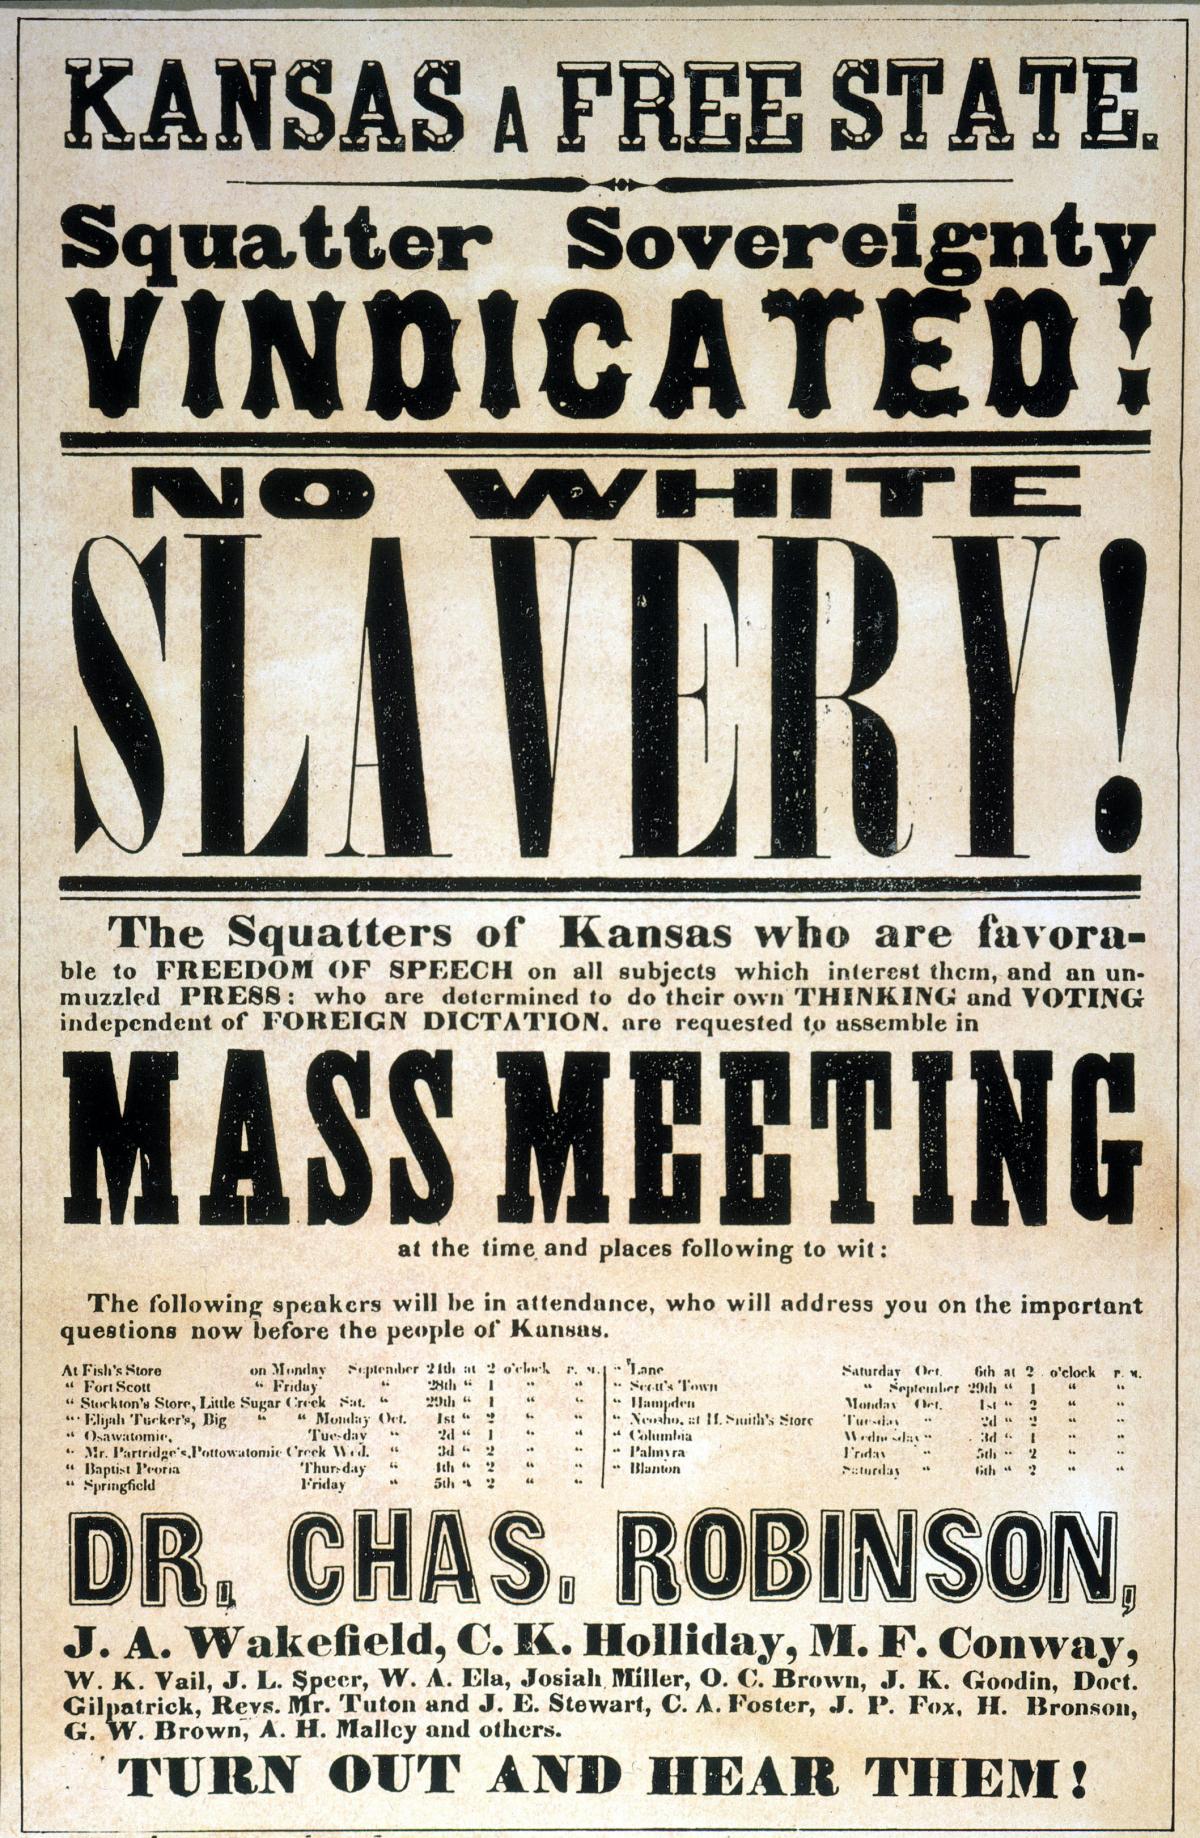 image of a poster advertising a meeting